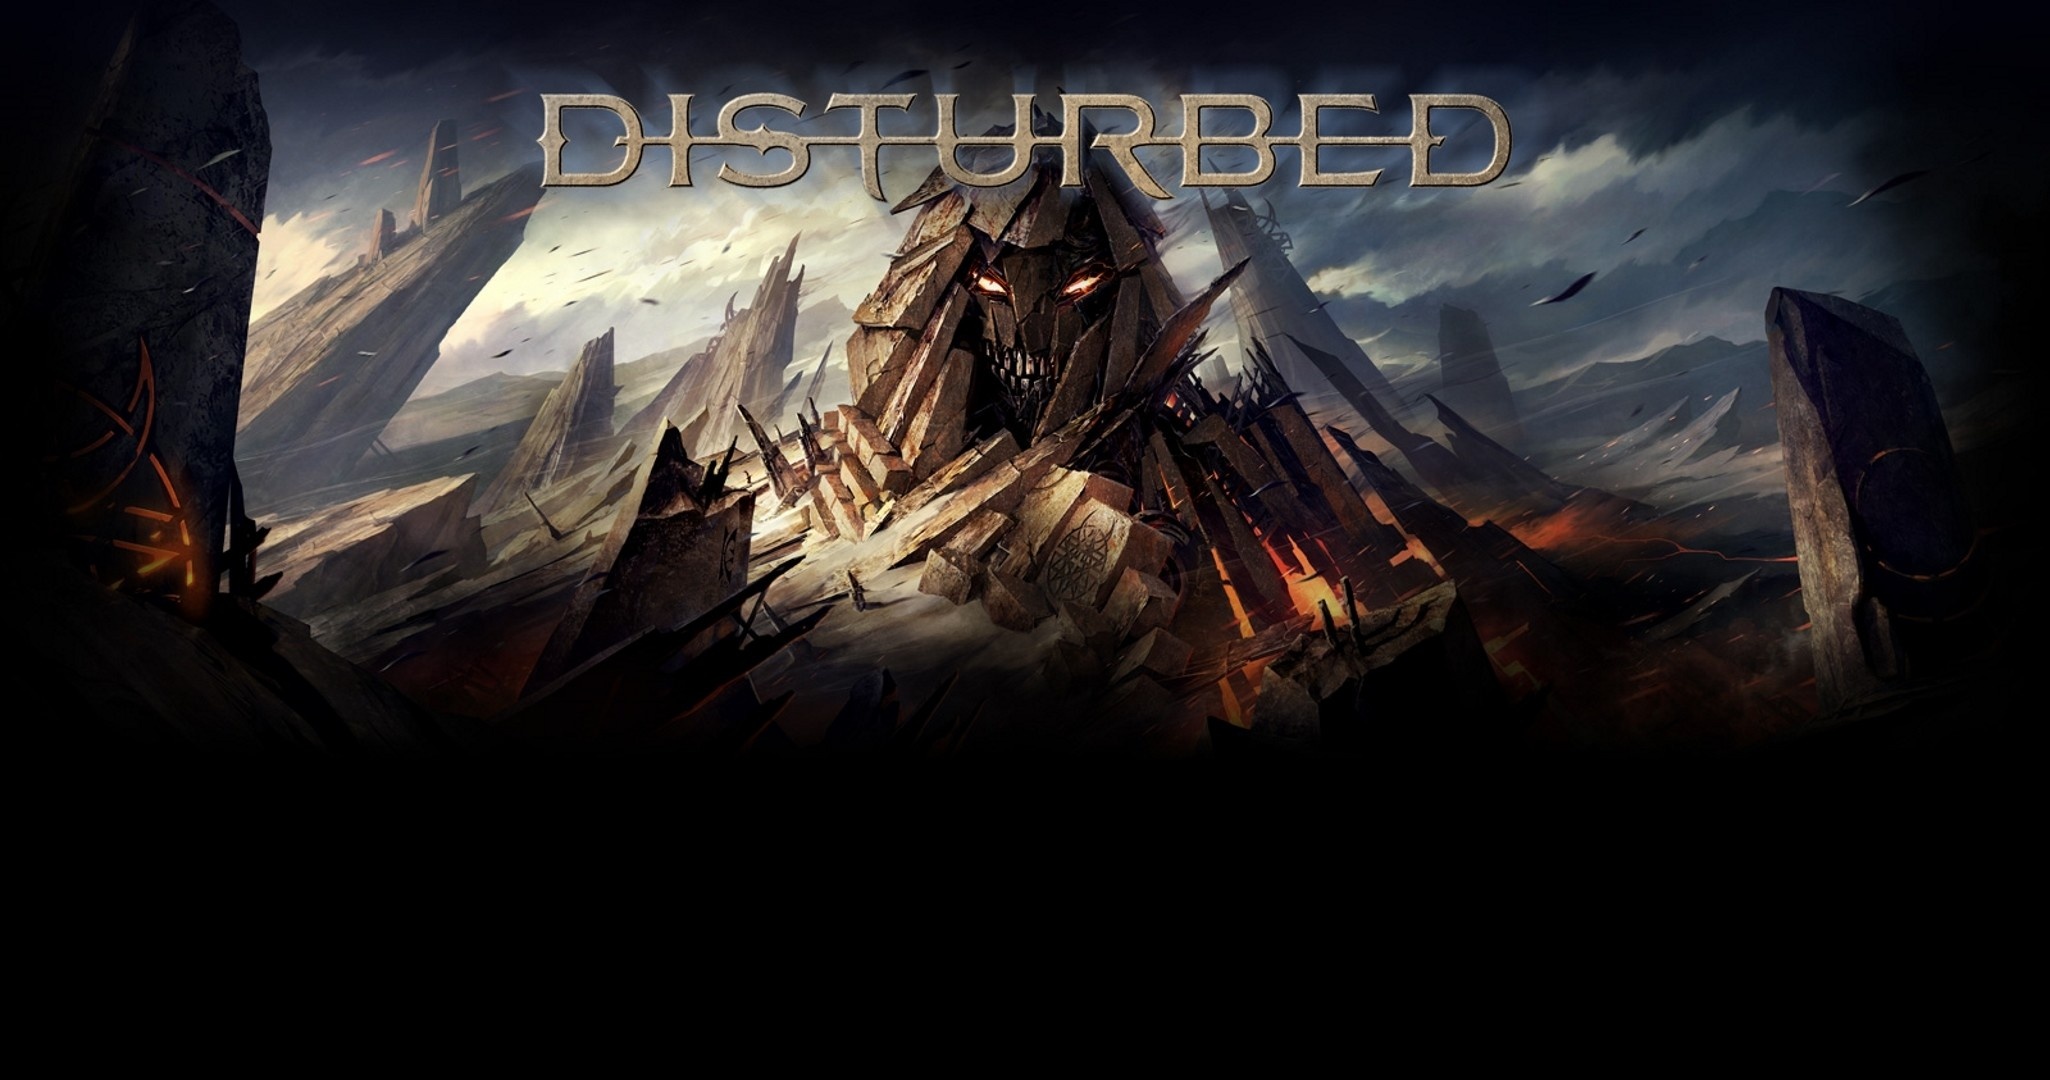 Disturbed band, Background posted, Ethan Simpson, 2050x1080 HD Desktop